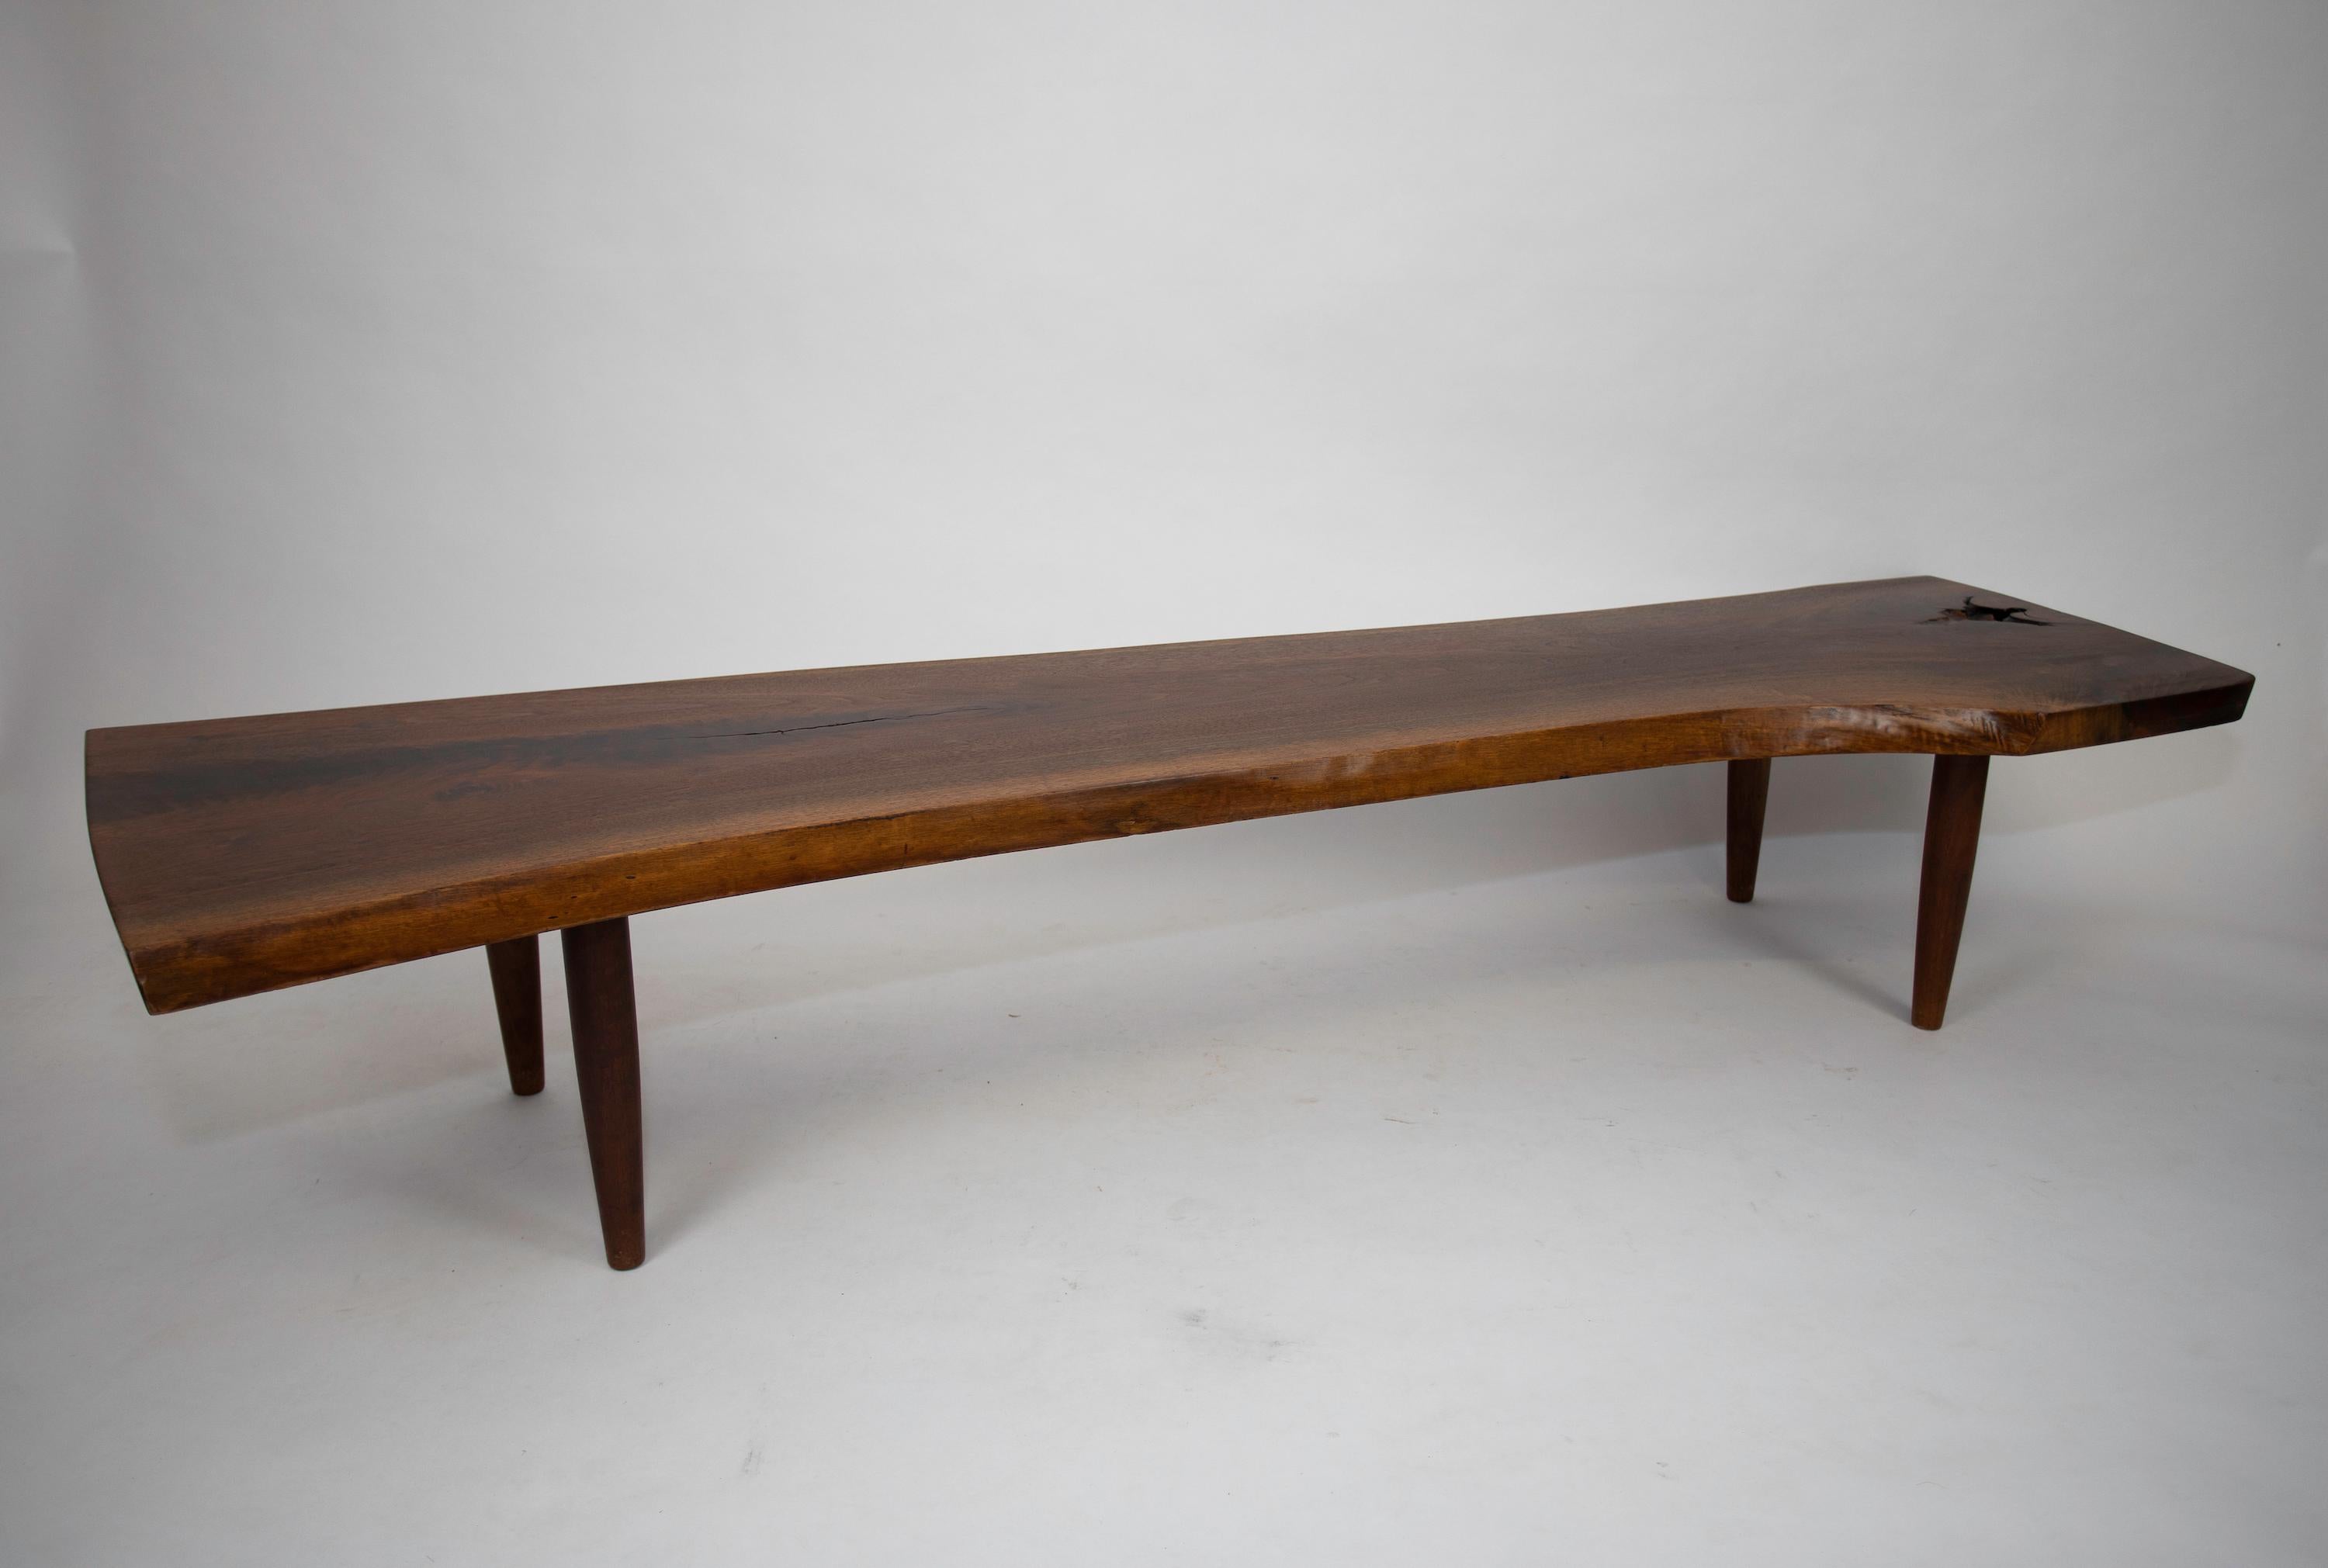 George Nakashima Coffee Table
Expressive wood Grain and fissures
Cleaned and Re-Oiled original Surface.